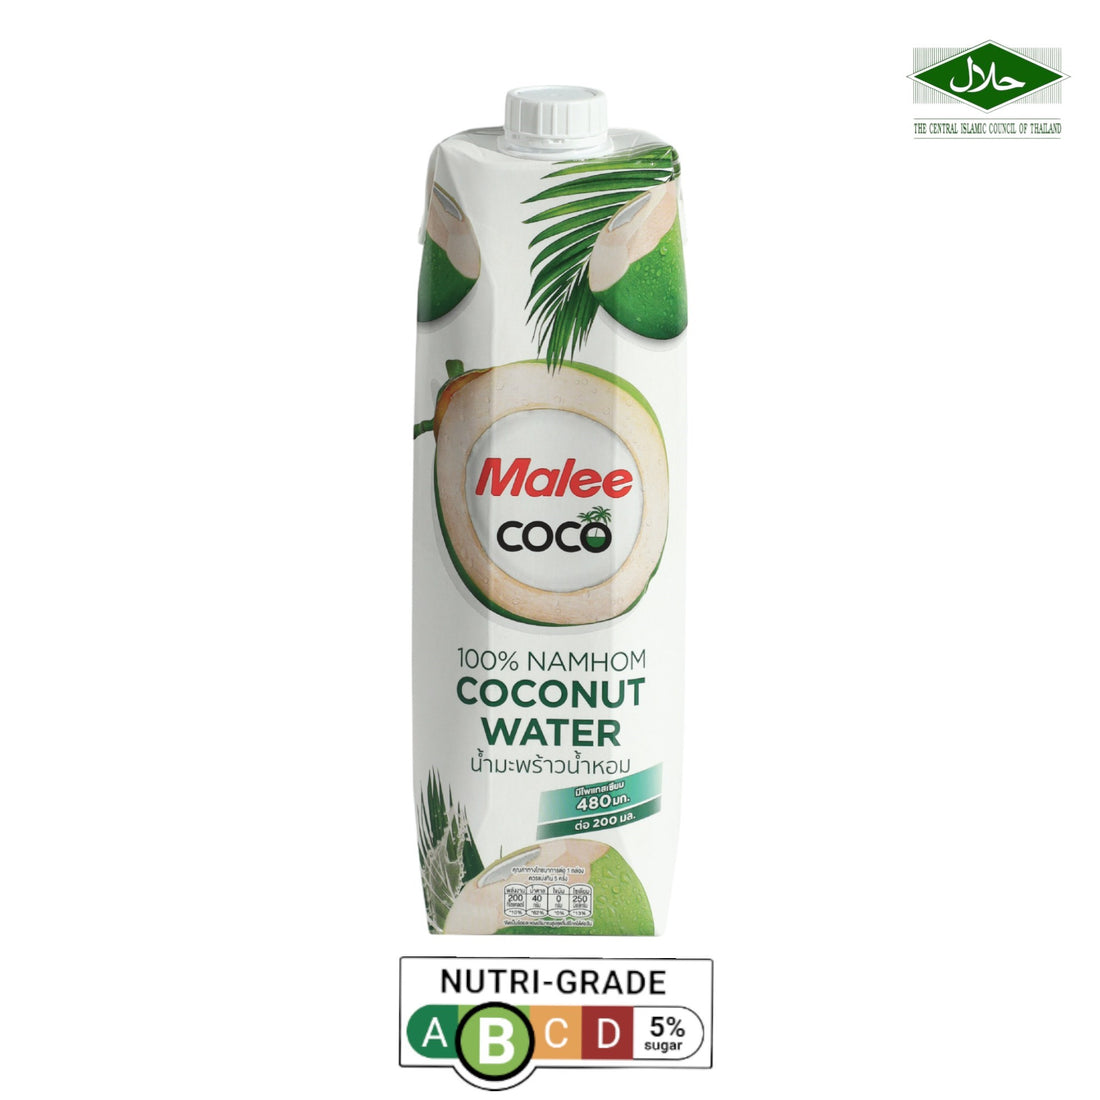 Malee Coco 100% Namhom Coconut Water 1000ml (2 For) (Exp:17/02/2025)